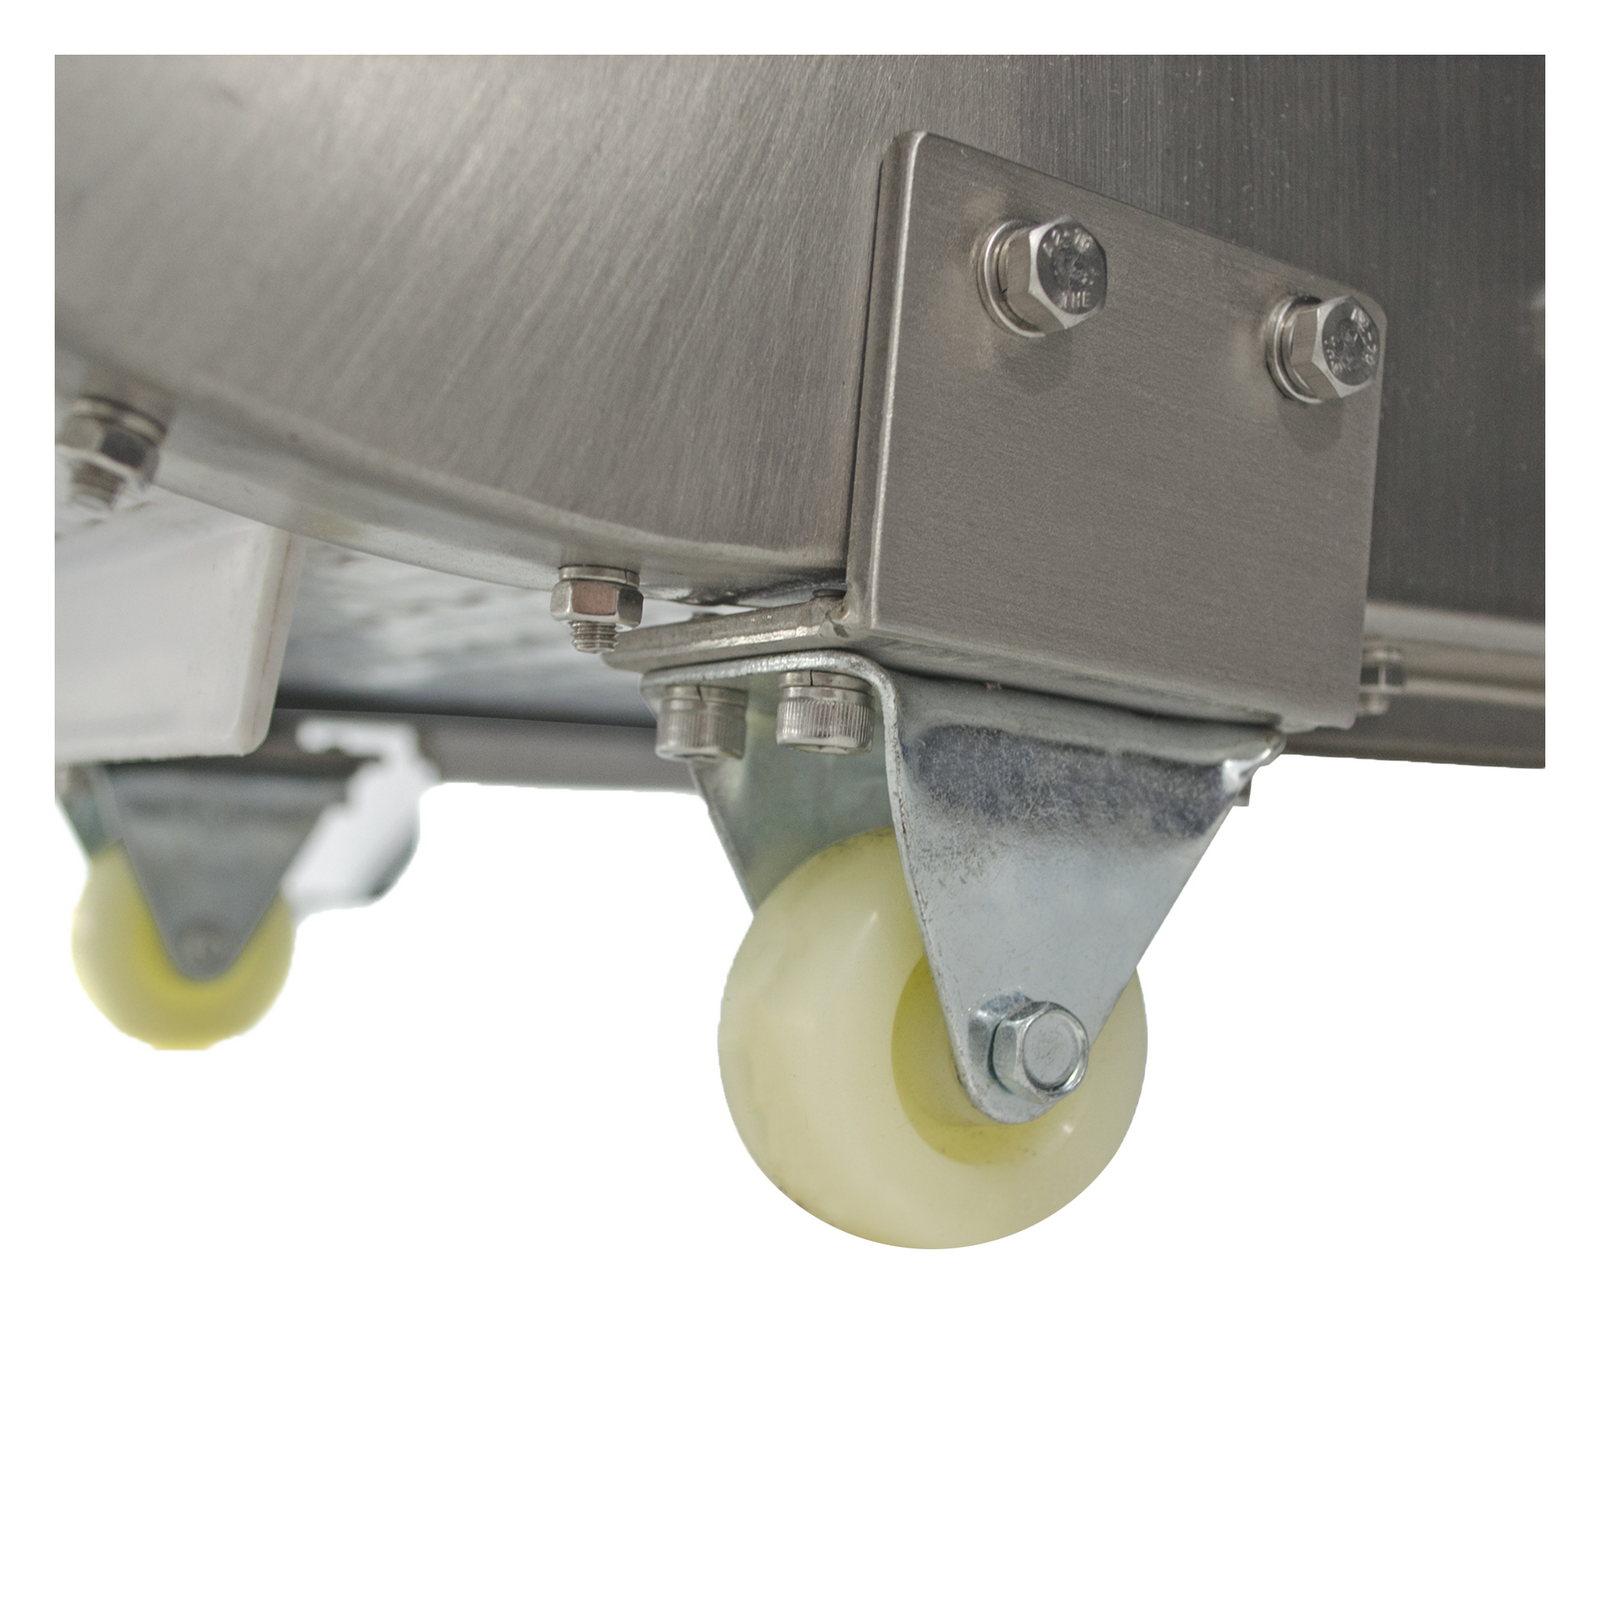 white rolling casters on stainless steel motorized take away conveyor